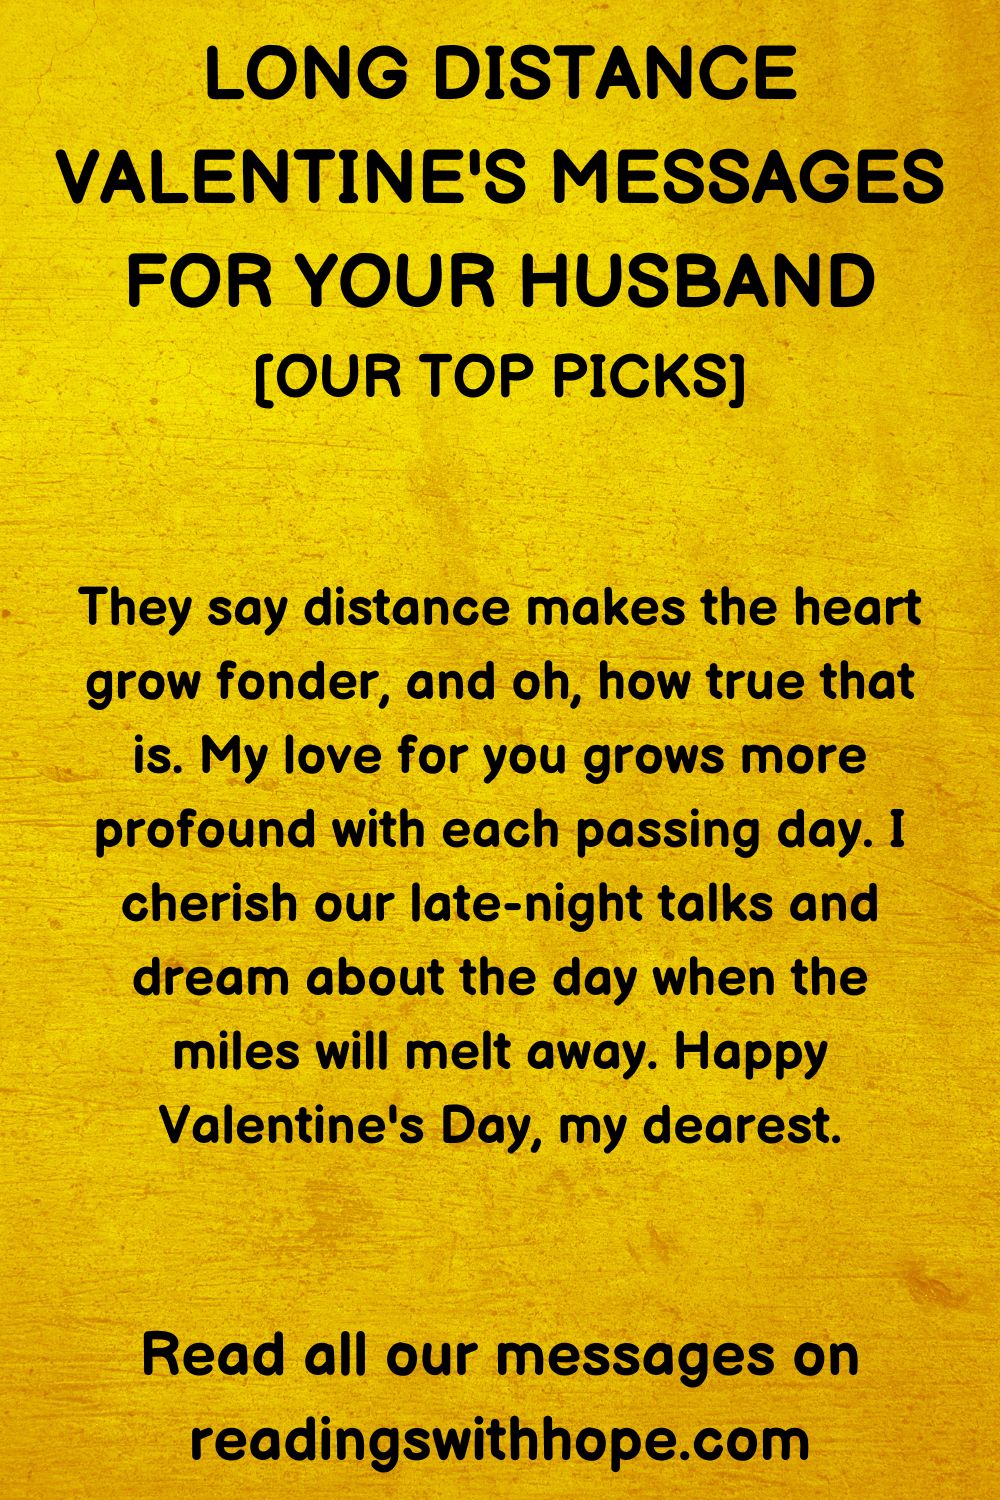 Long Distance Valentine's Day Message for your Husband